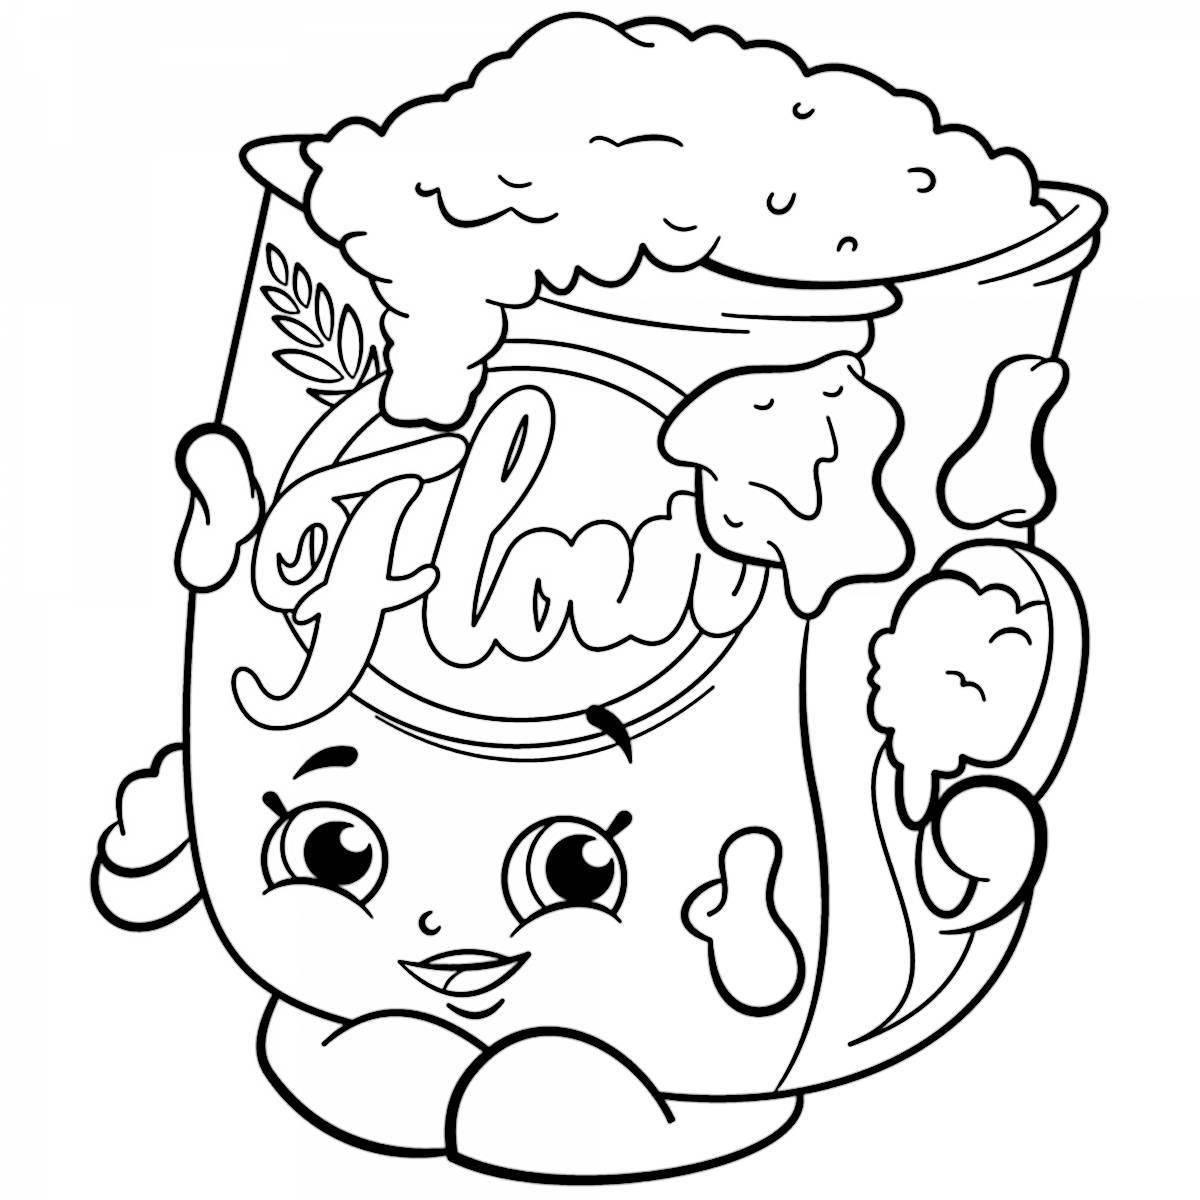 Adorable shopkins coloring book for girls